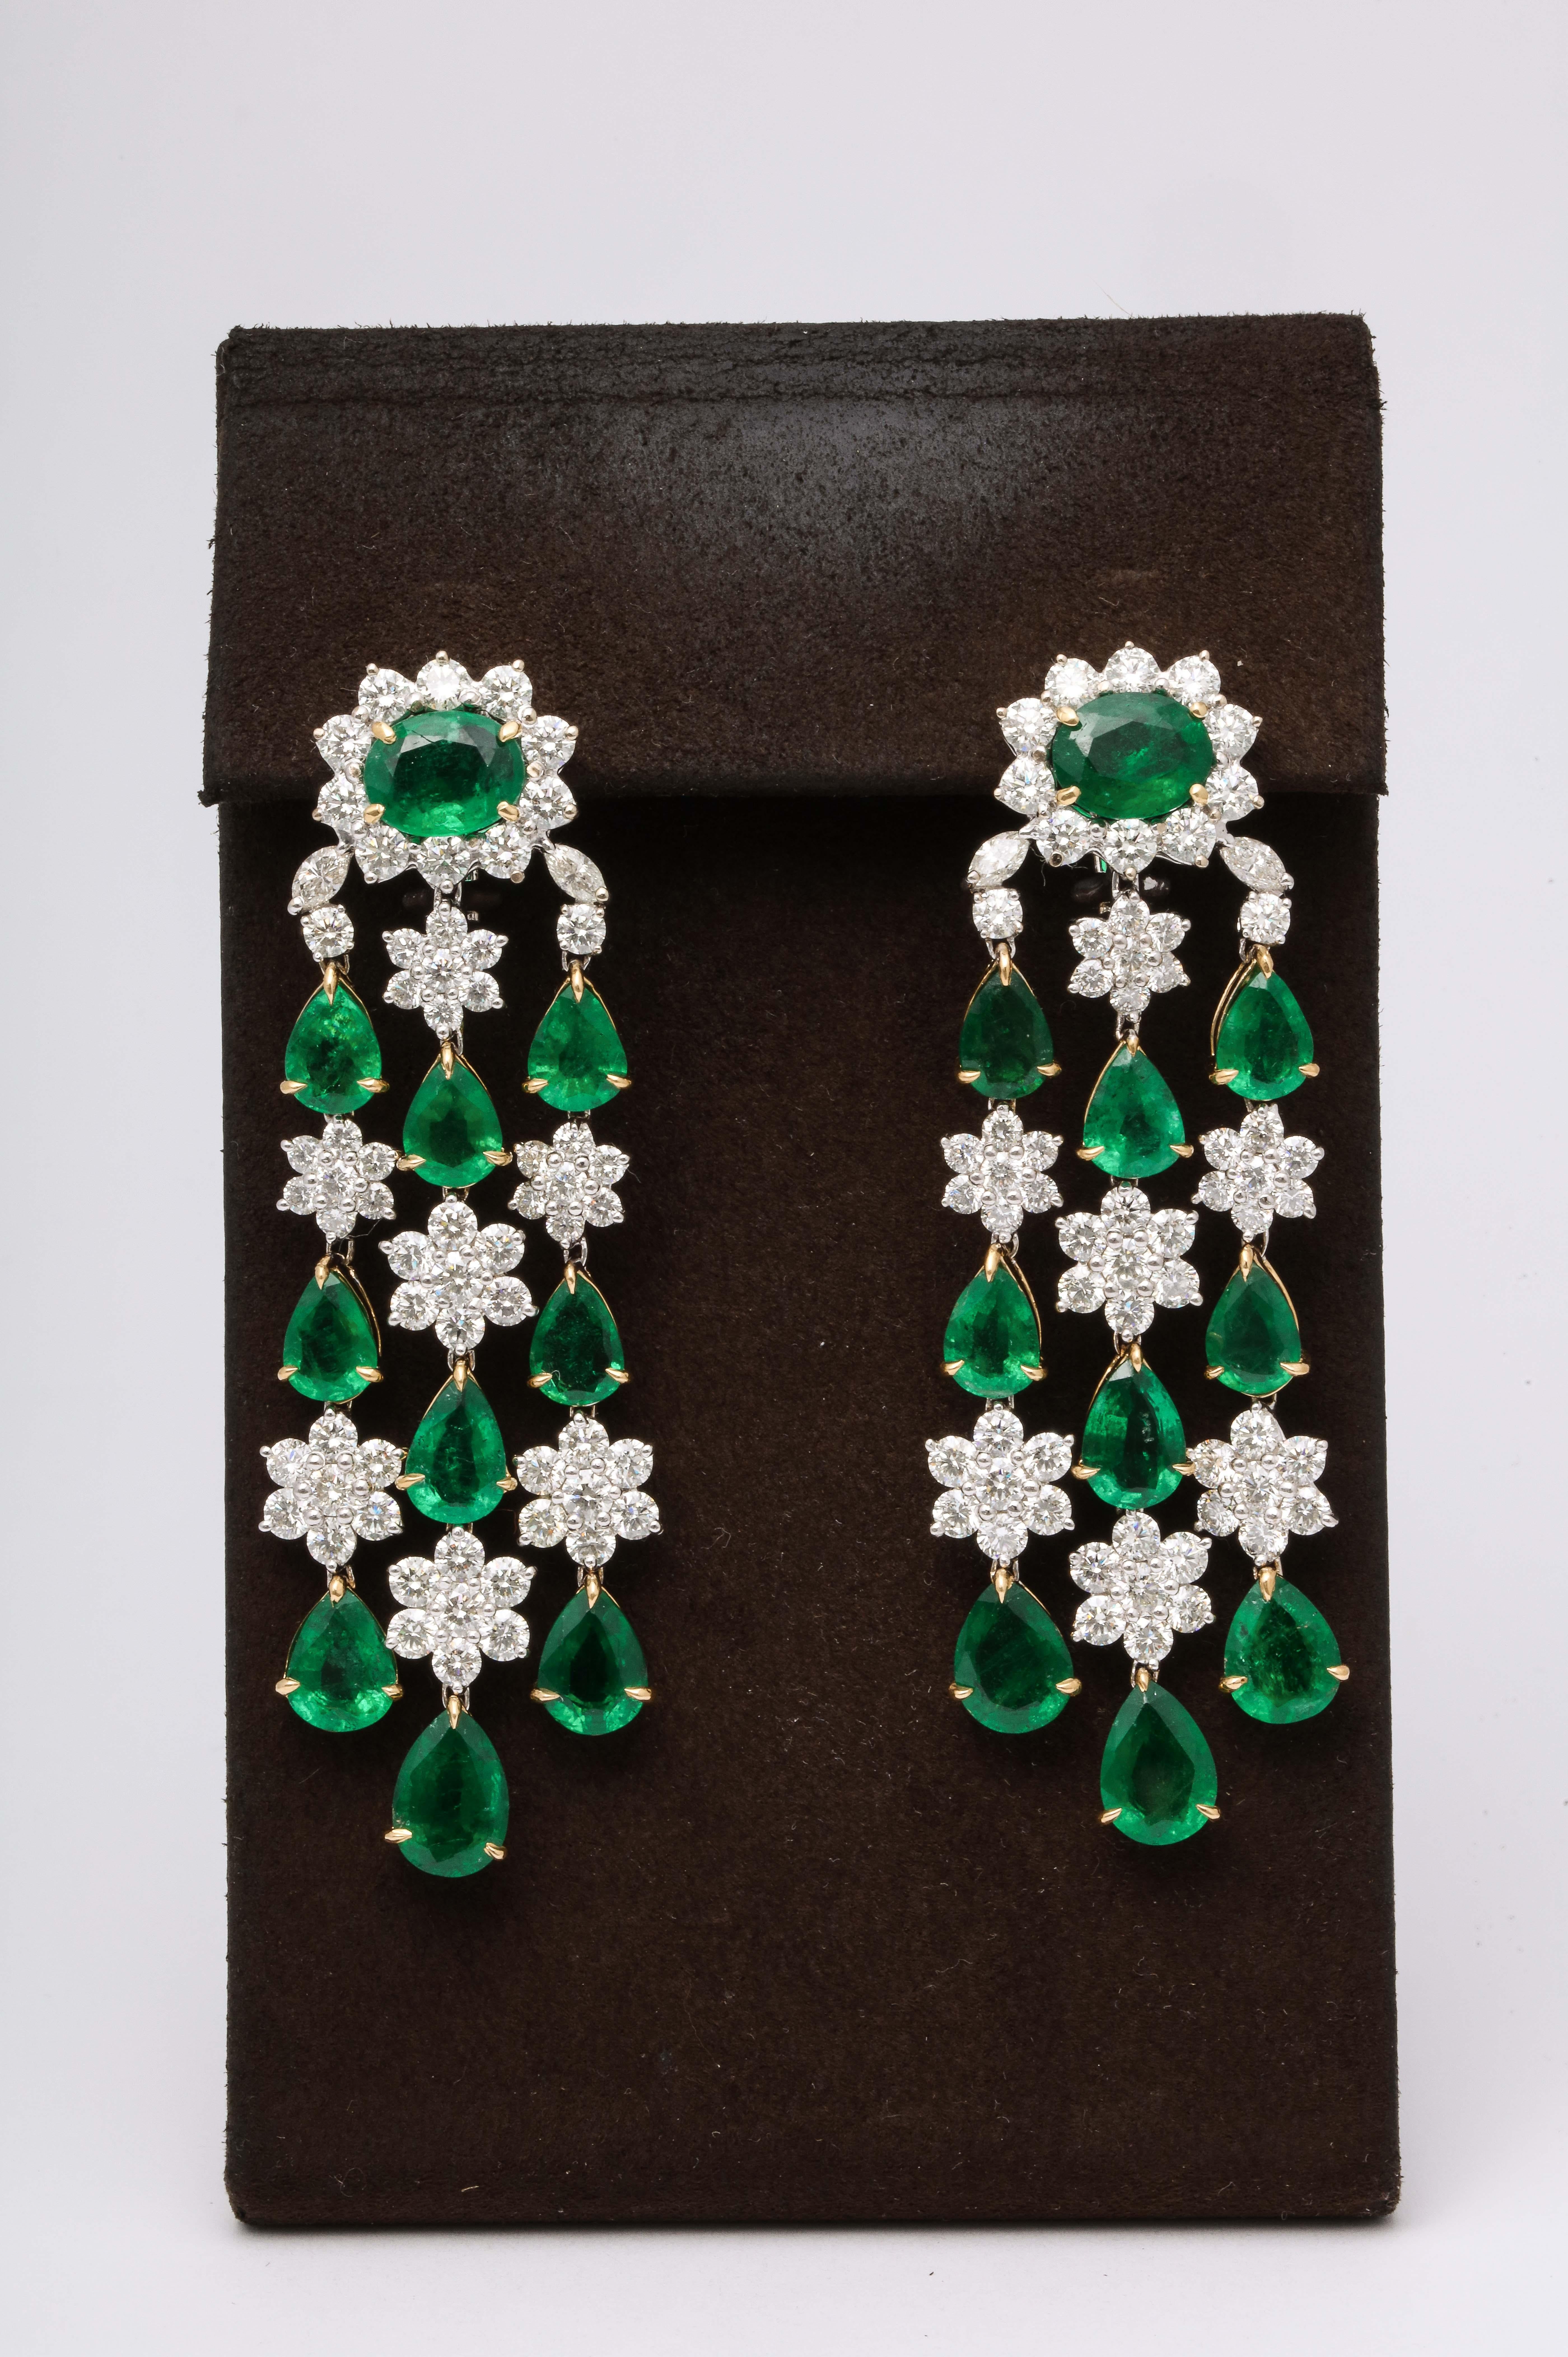 
Fabulous emerald earrings with great movement.

24.93 carats of fine green emeralds

12.21 carats diamonds

18k white and yellow gold 

Approximately 2.75 inches long, .78 inches wide.

